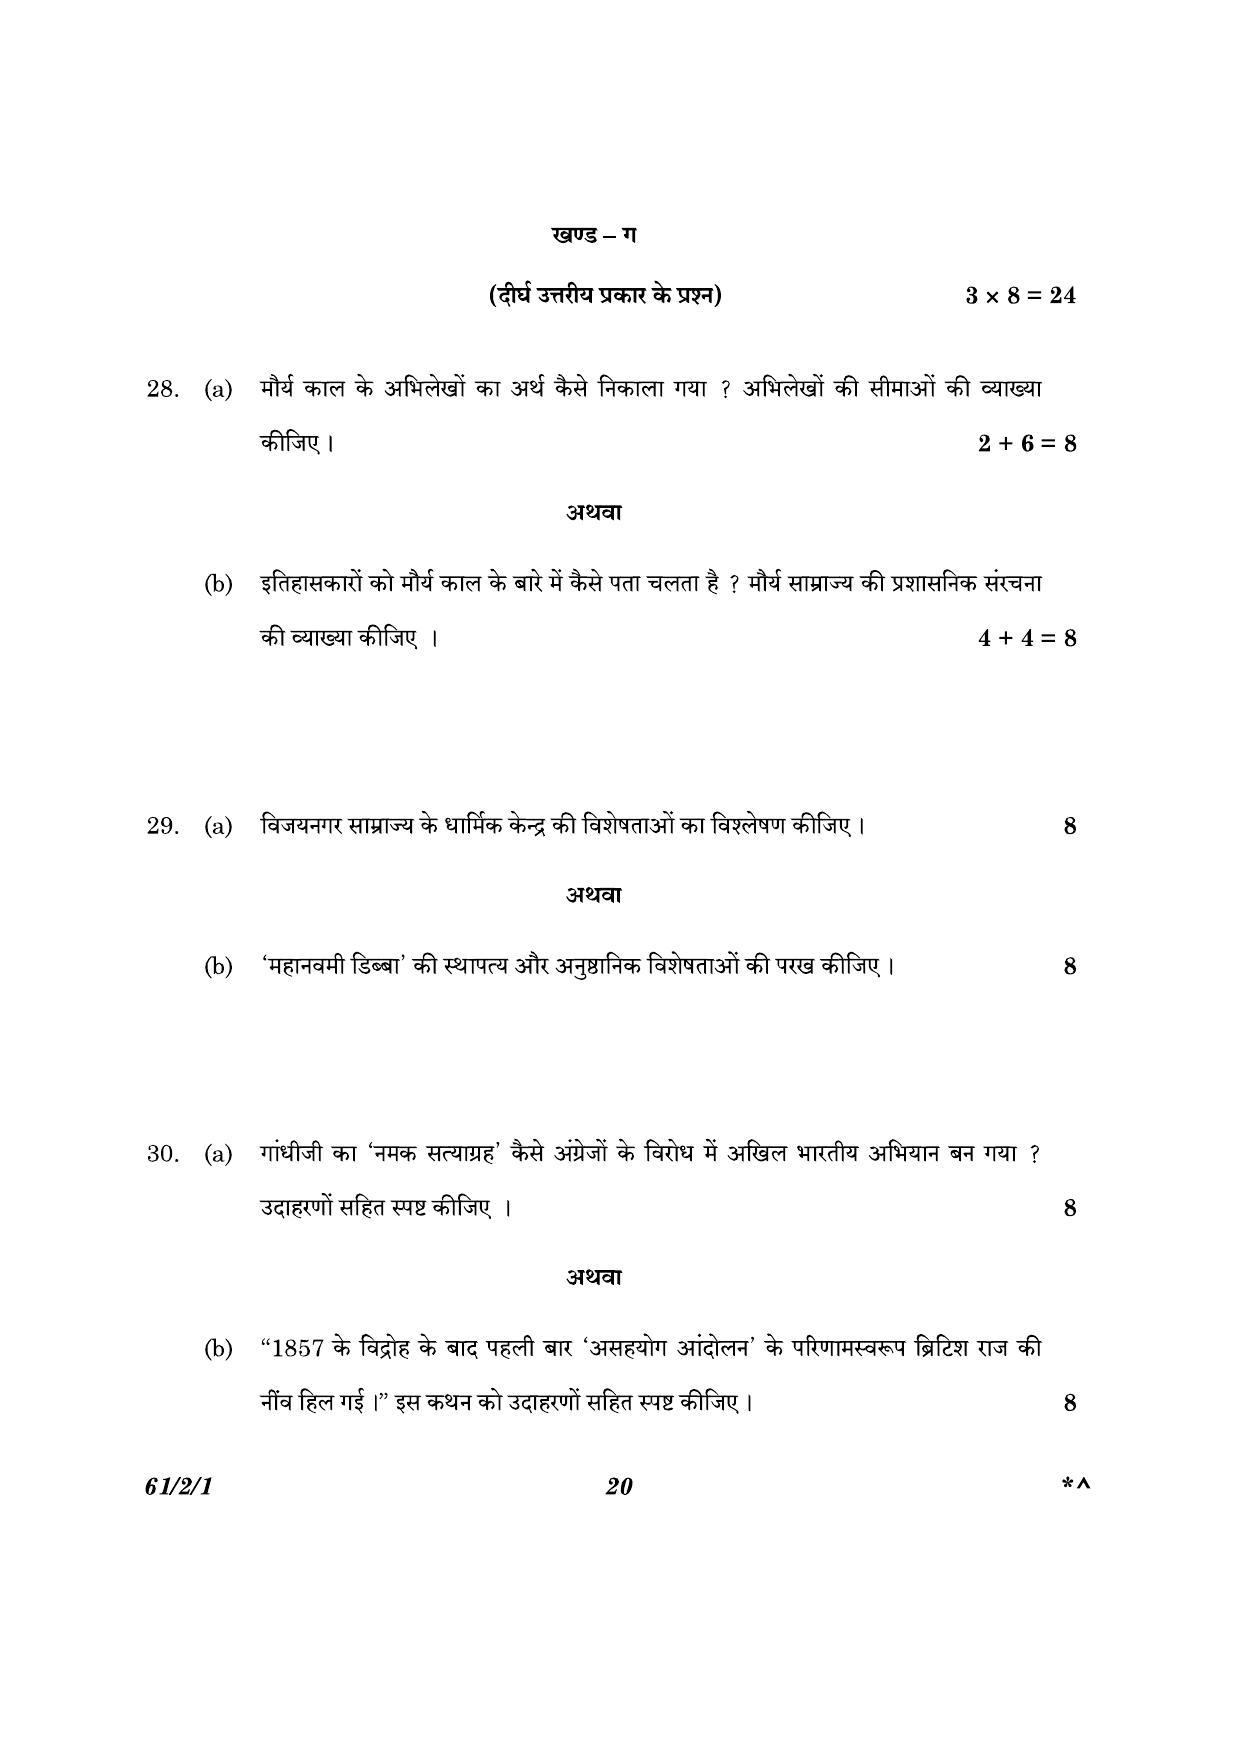 CBSE Class 12 61-2-1 History 2023 Question Paper - Page 20